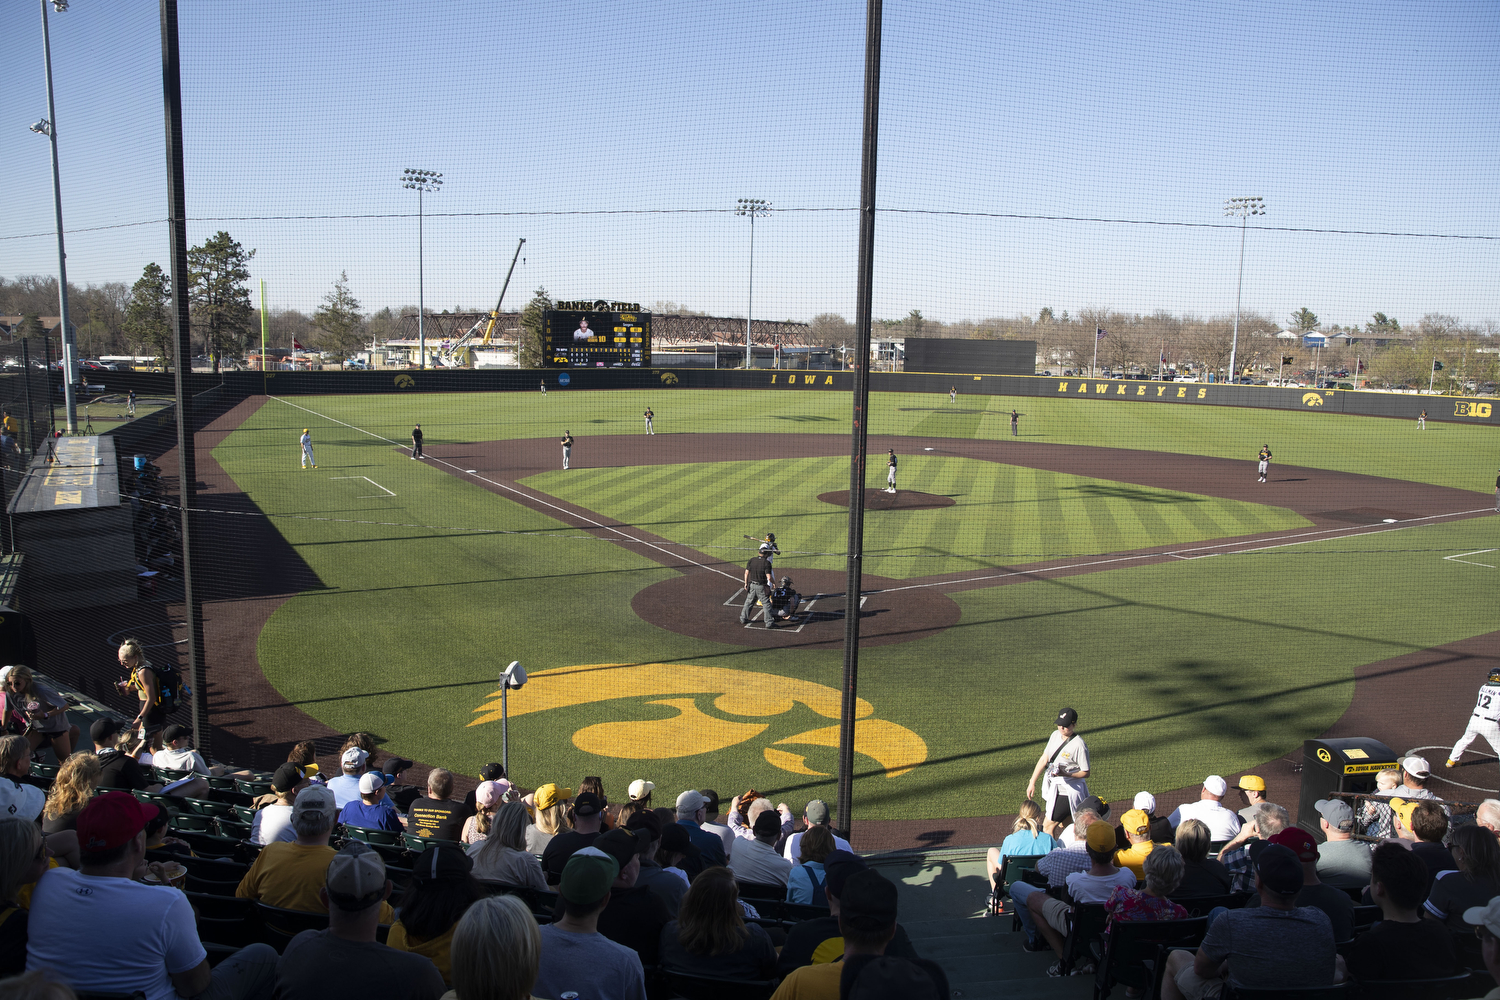 Iowa Hawkeyes baseball under investigation by racing and gaming commission  for potential gambling: report